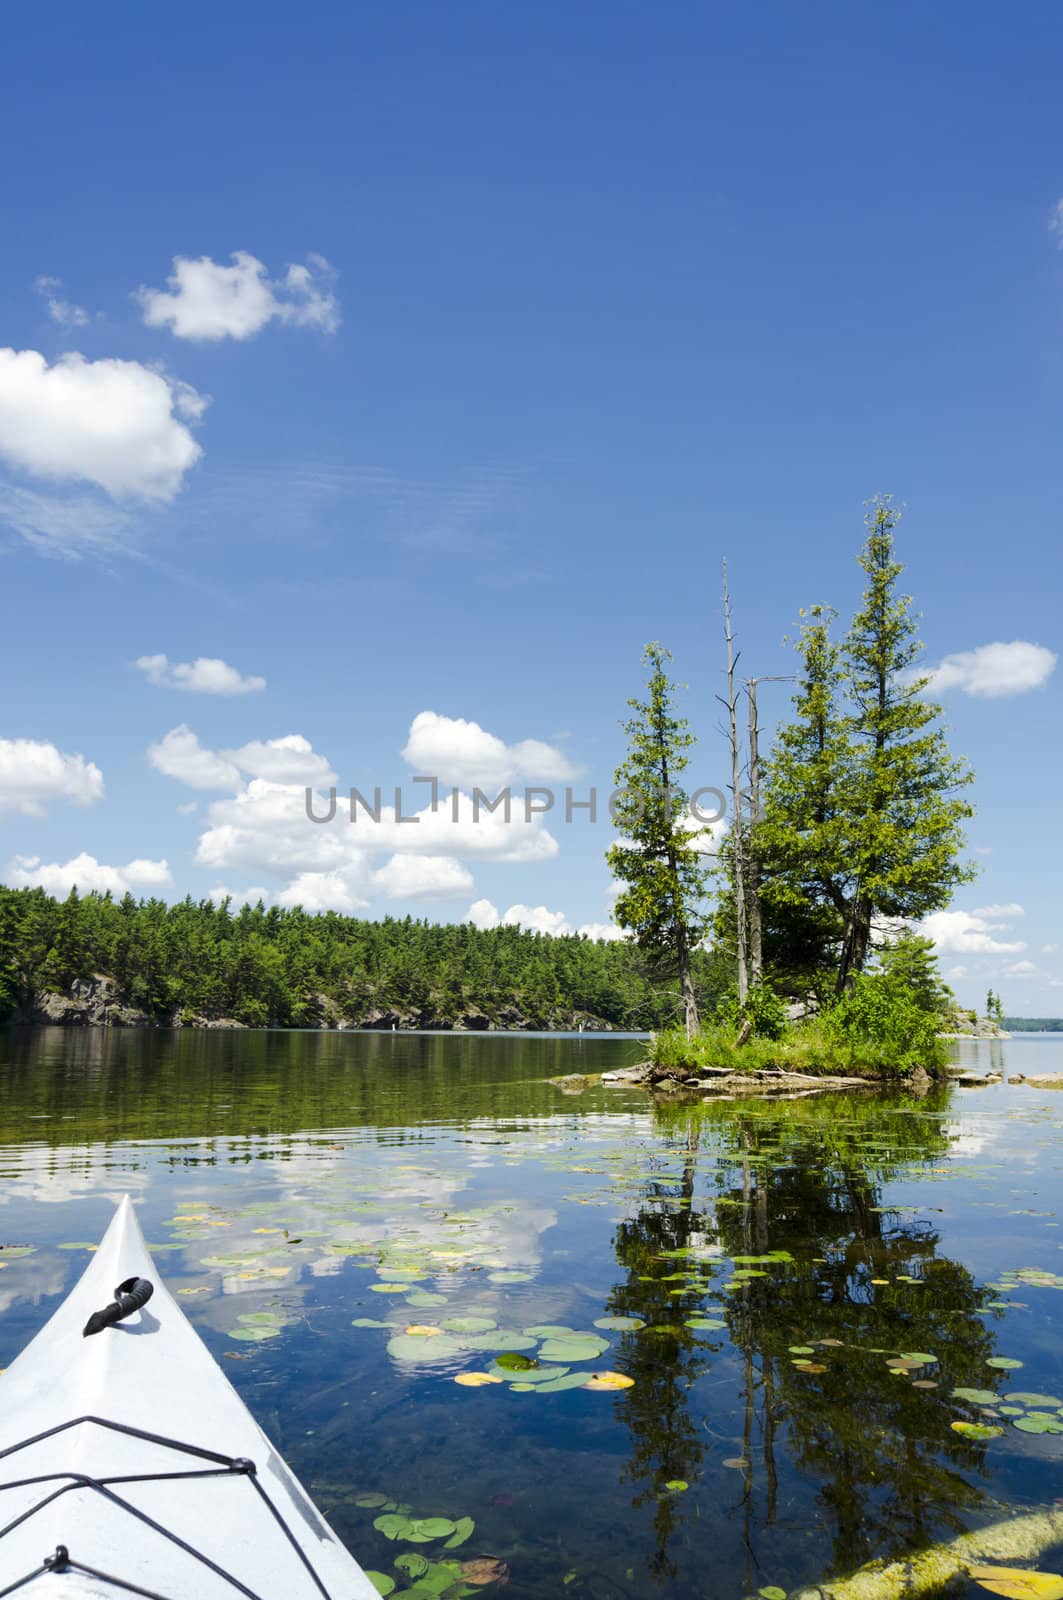 Sunny scenic with kayak in the foreground with small island on a northern lake